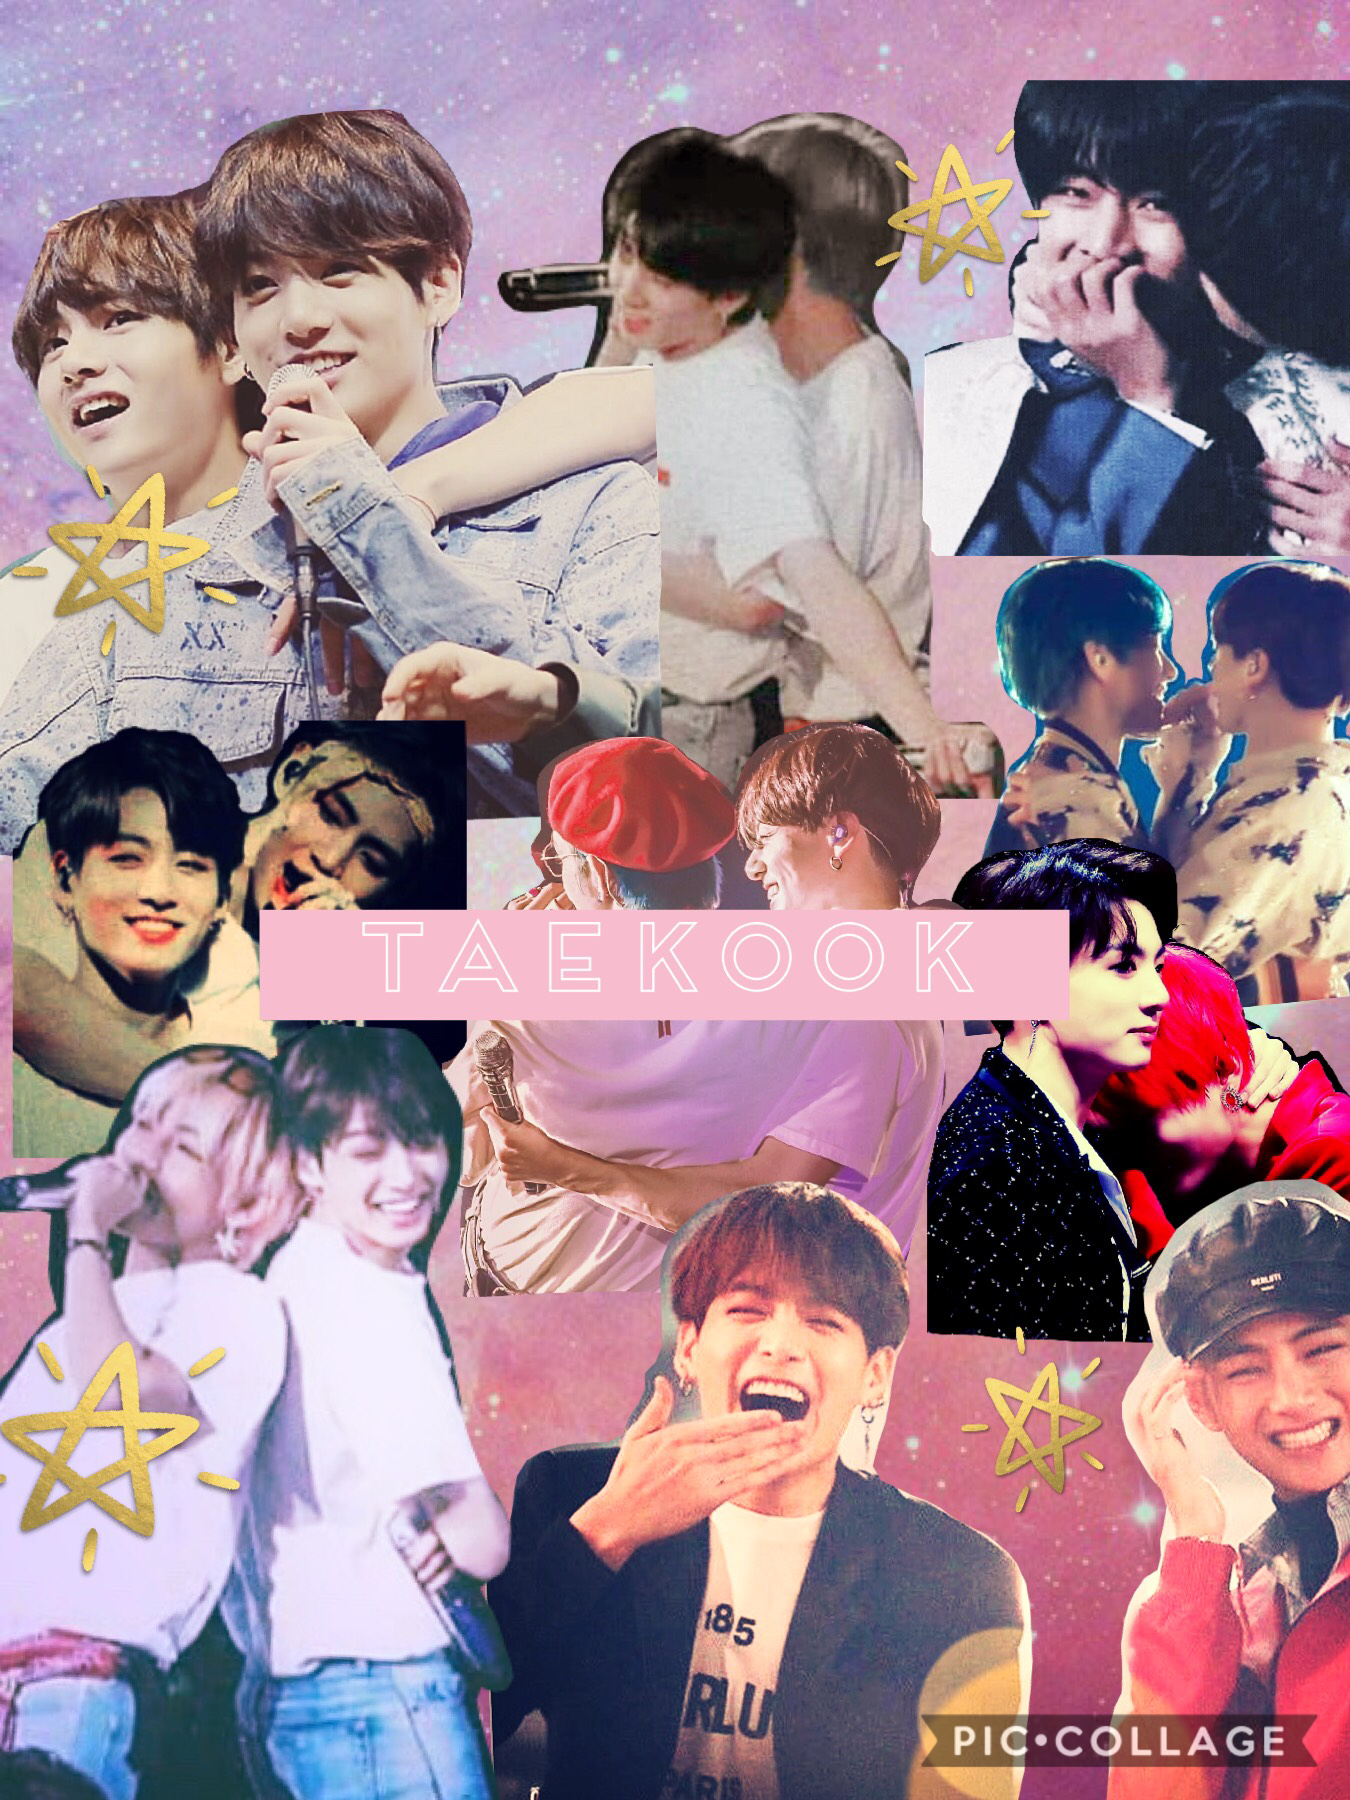 Hhhh I'm like two days late, but happy Taekook day! Lol the making of this edit was stressful😭😭😭 s e n d  h e l p